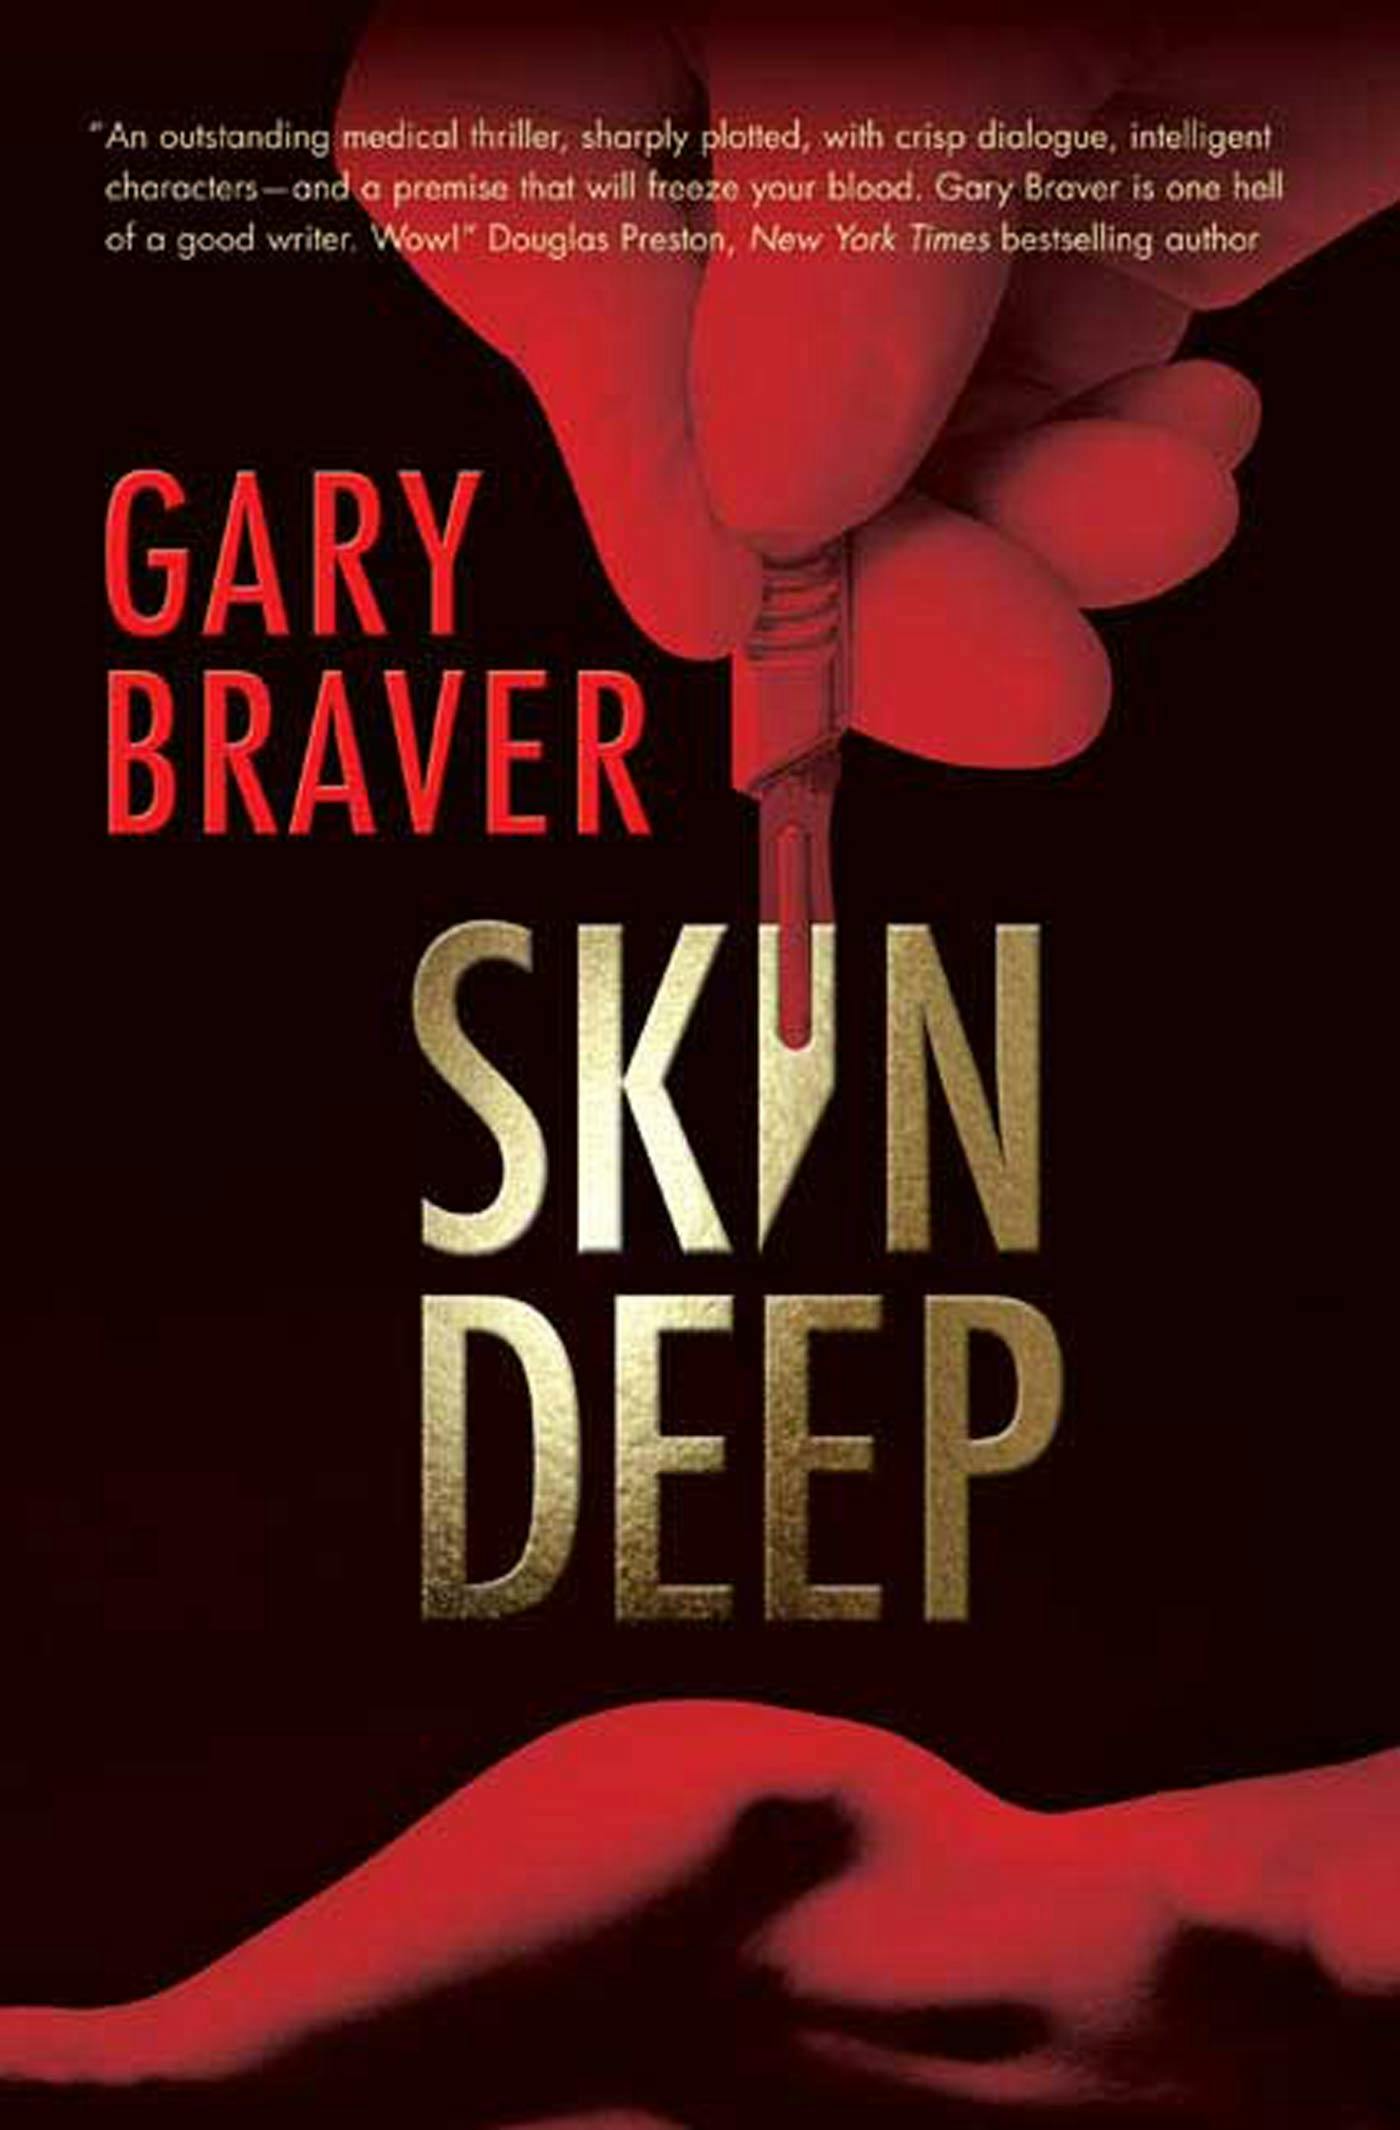 Cover for the book titled as: Skin Deep